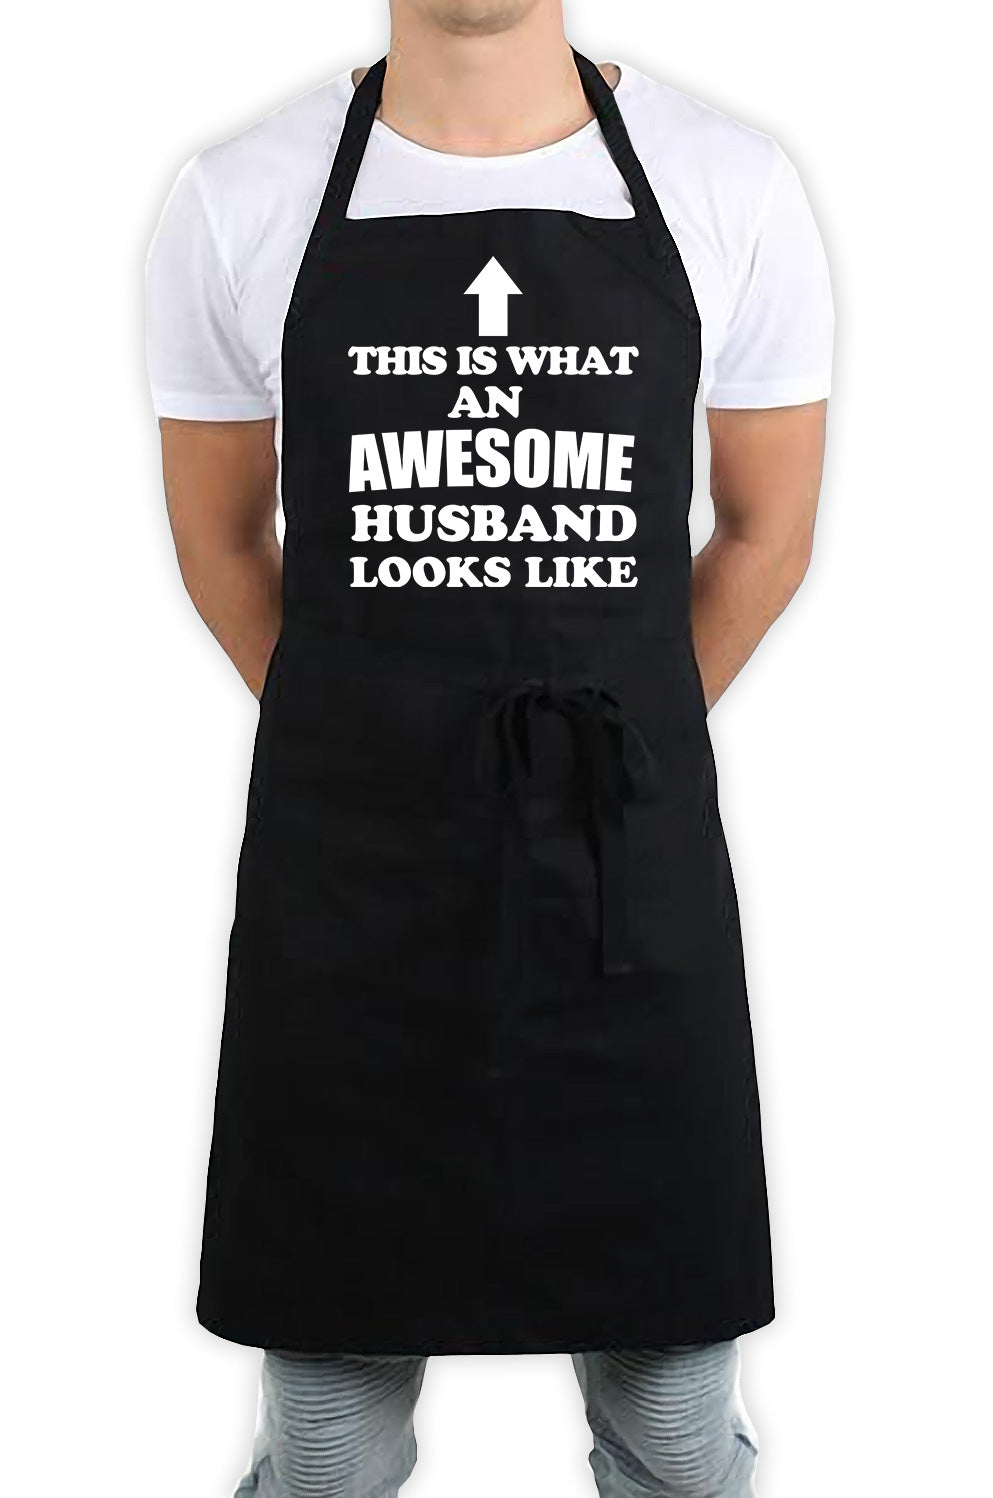 This Is What An Awesome Husband Looks Like Funny Kitchen BBQ Apron Black